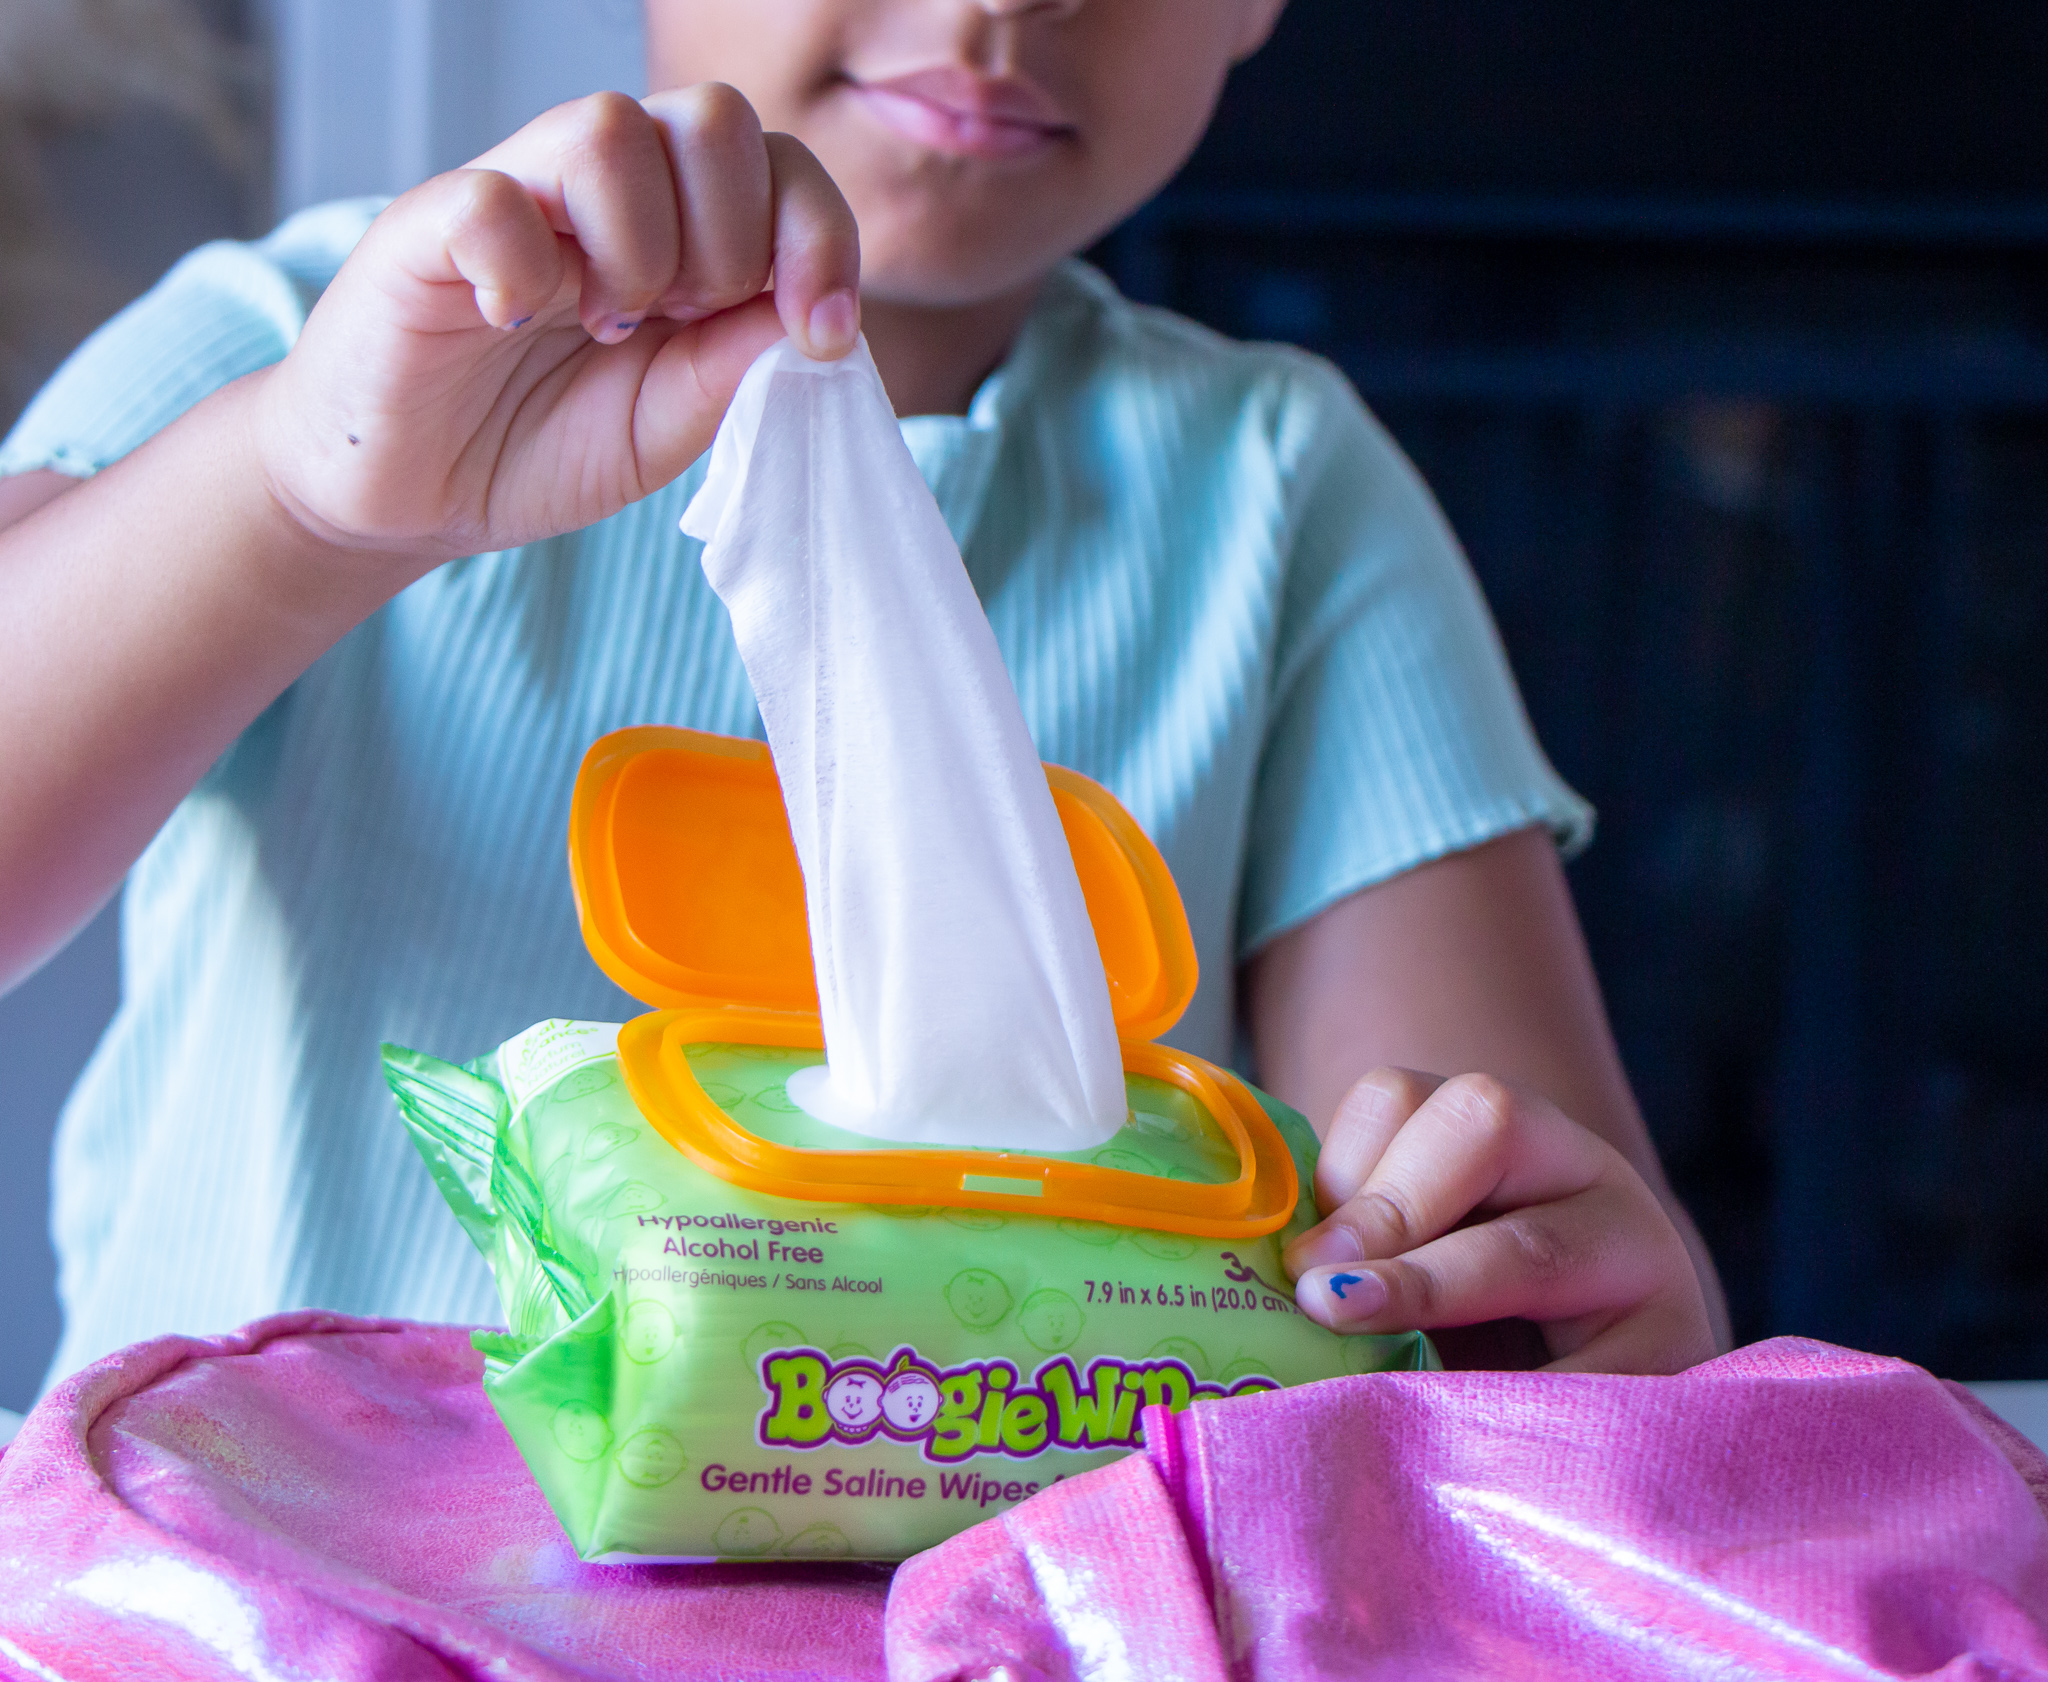 Simple Tips to Keep Your Kids Healthy and The Germs at Bay!